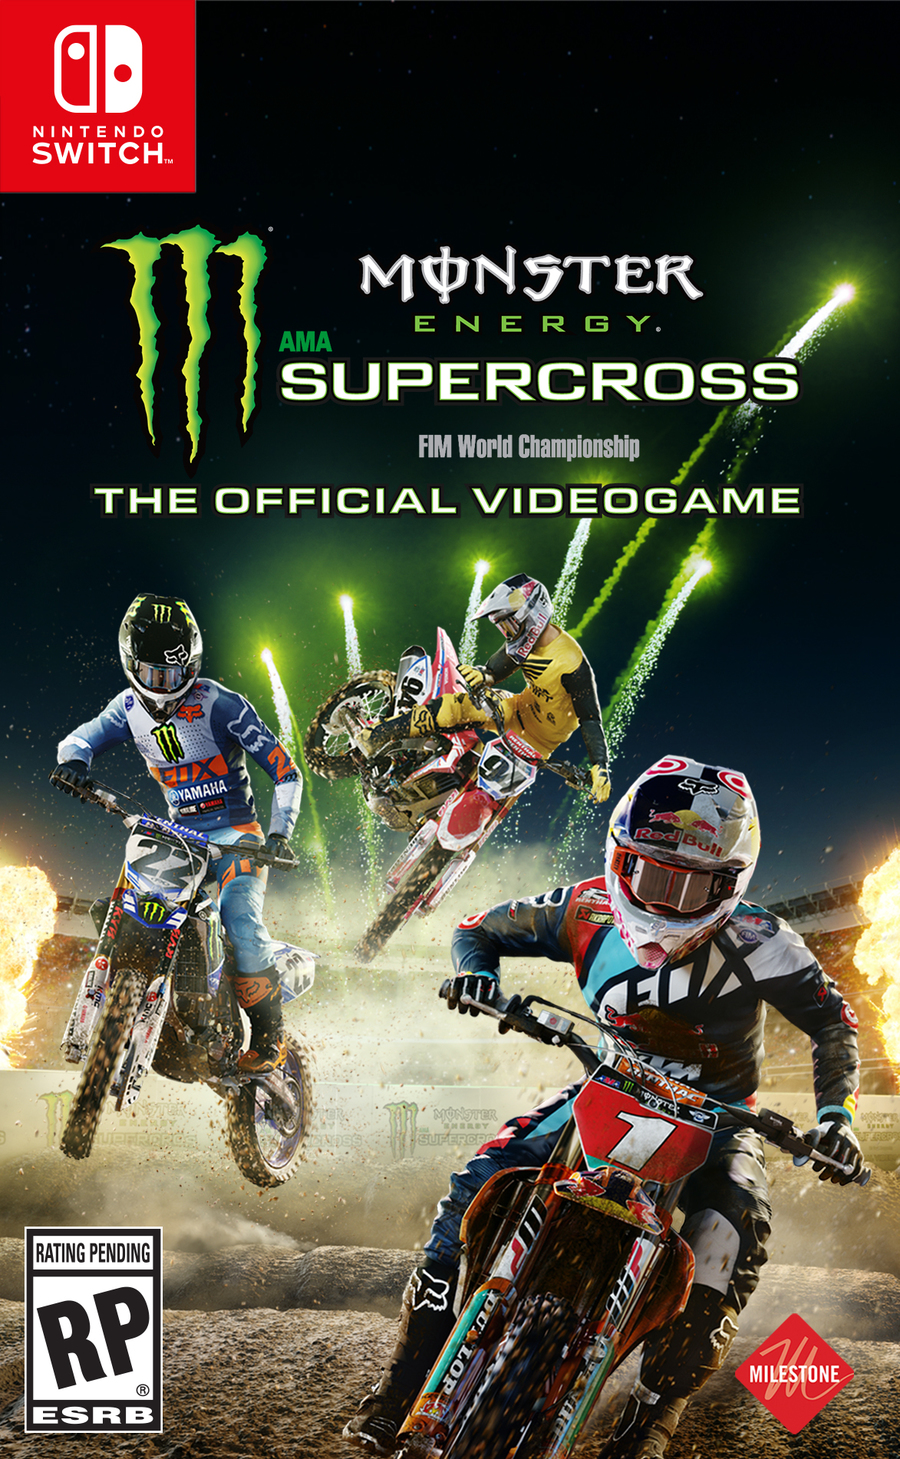 Monster-energy-supercross-the-official-videogame-1508078689619854